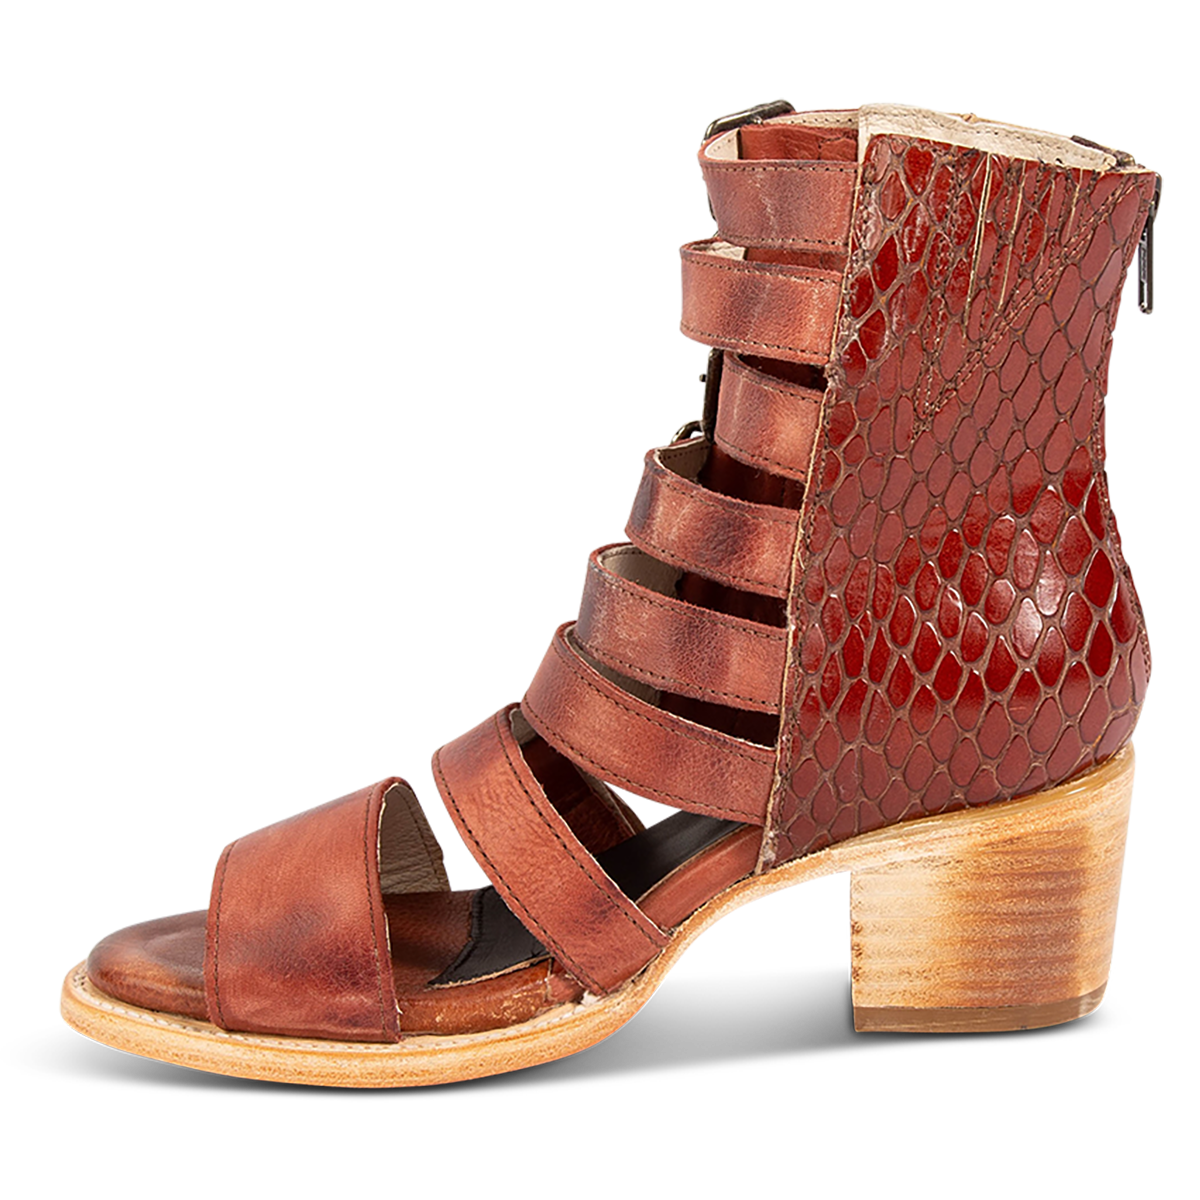 Inside view showing FREEBIRD women's Country rust snake multi embossed leather sandal with gore detailing and adjustable leather straps